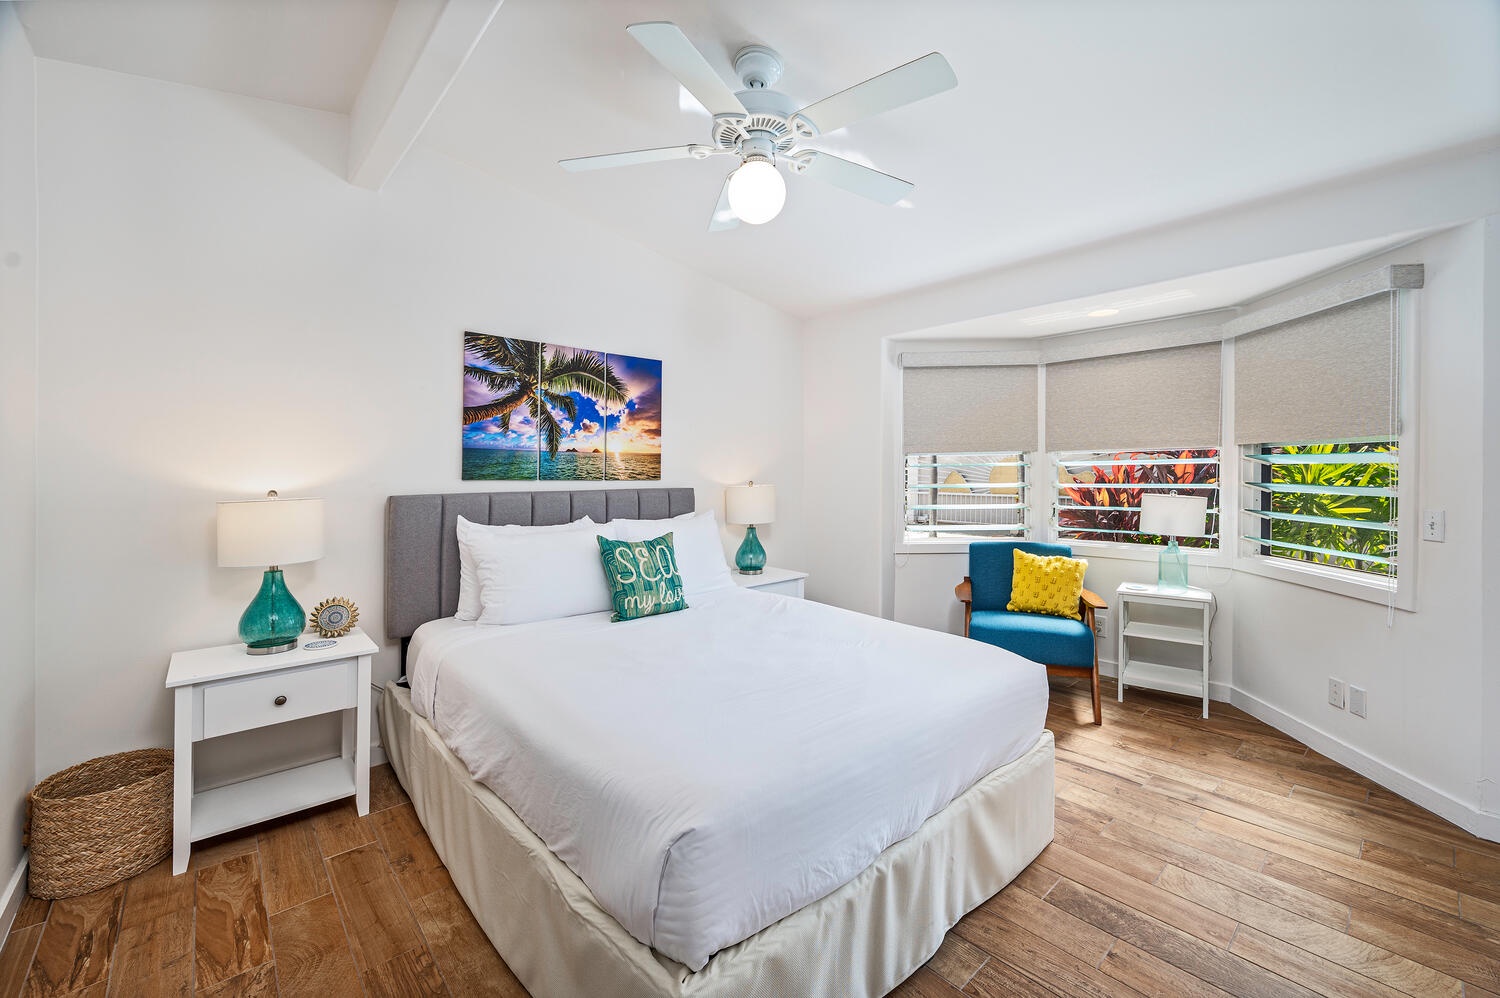 Kailua Vacation Rentals, Villa Hui Hou - Bedroom 4 is a kids haven with their very own tv. Complete with a queen bed, full size bunkbed and twin trundle!